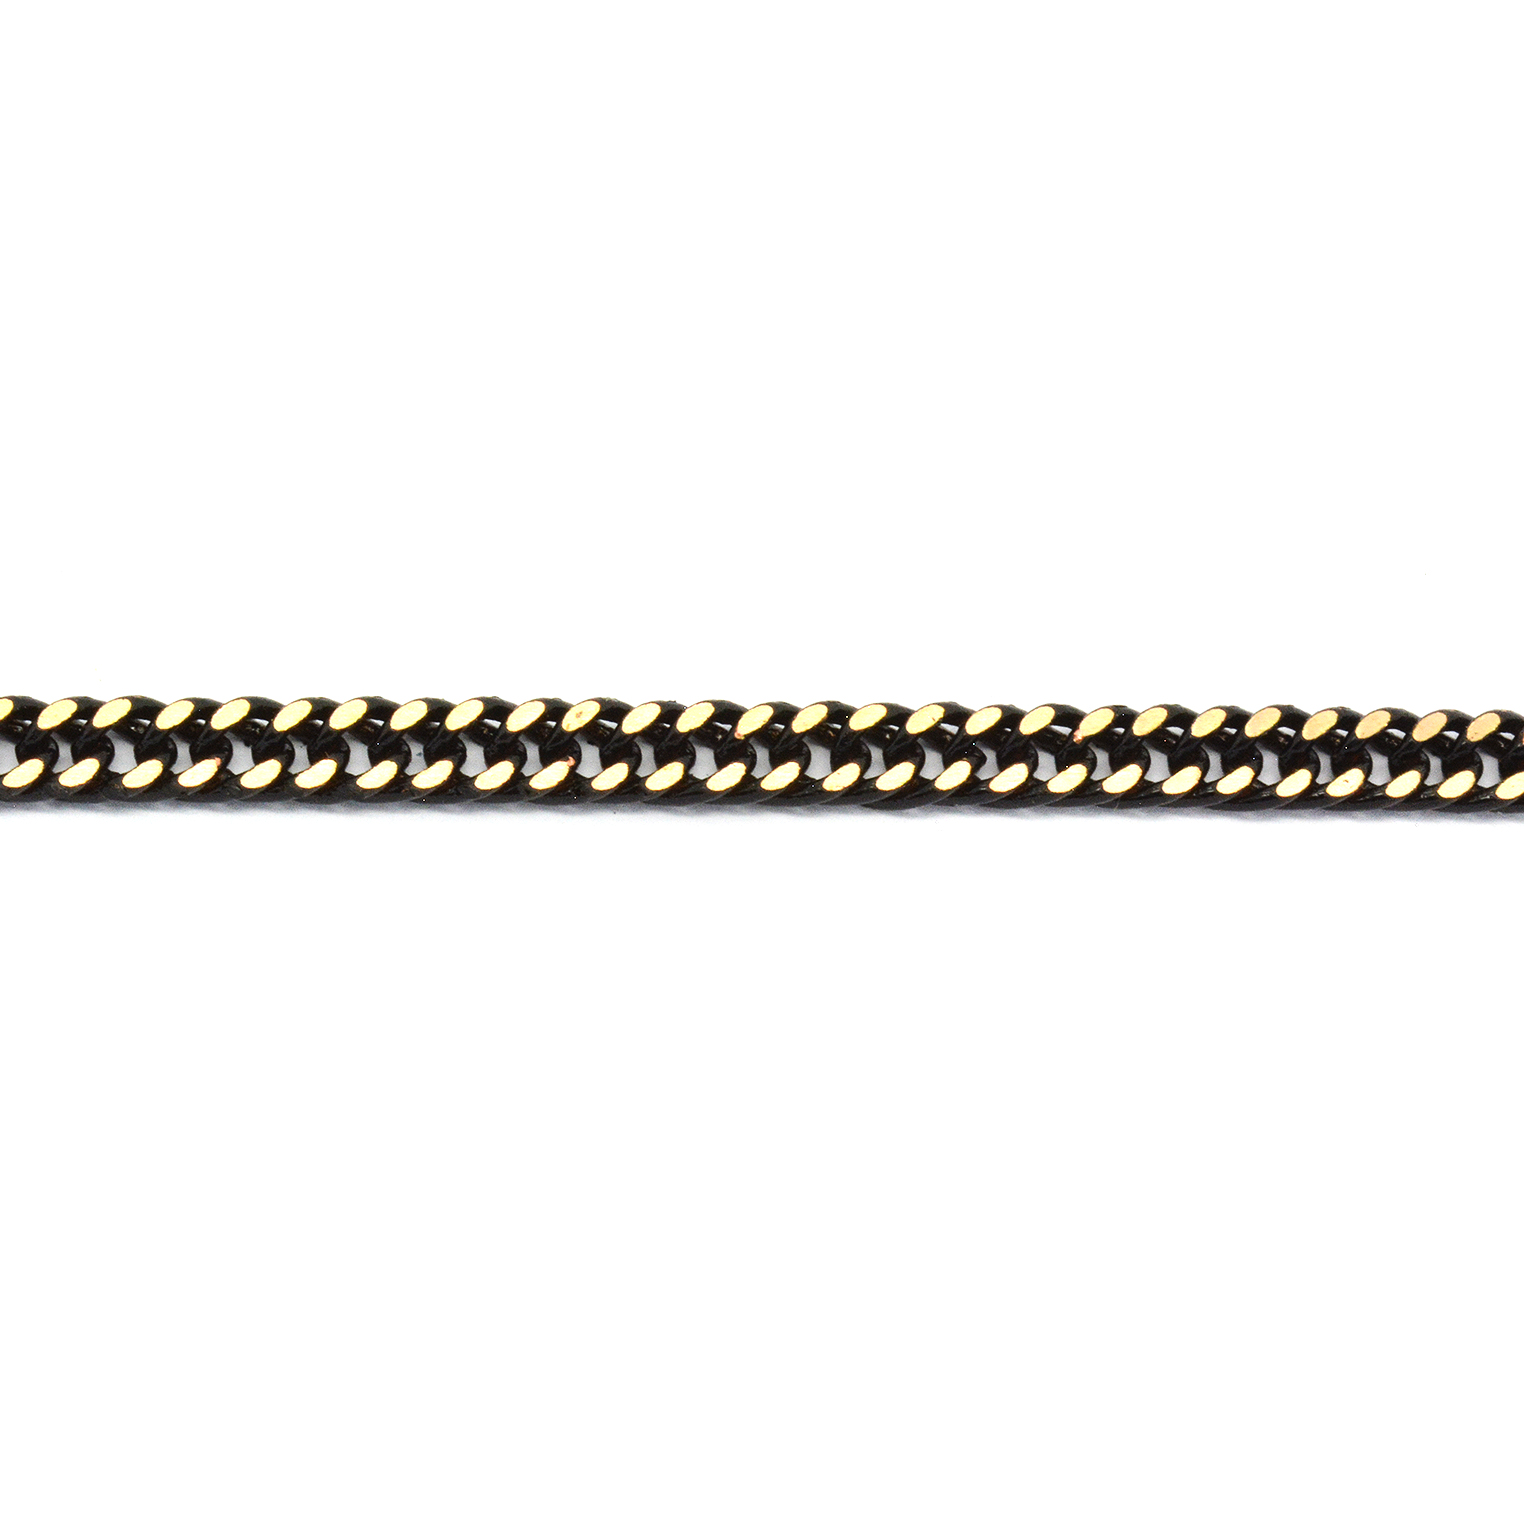 Polished black enamel stainless steel curb (gourmette) chain 4.2mm